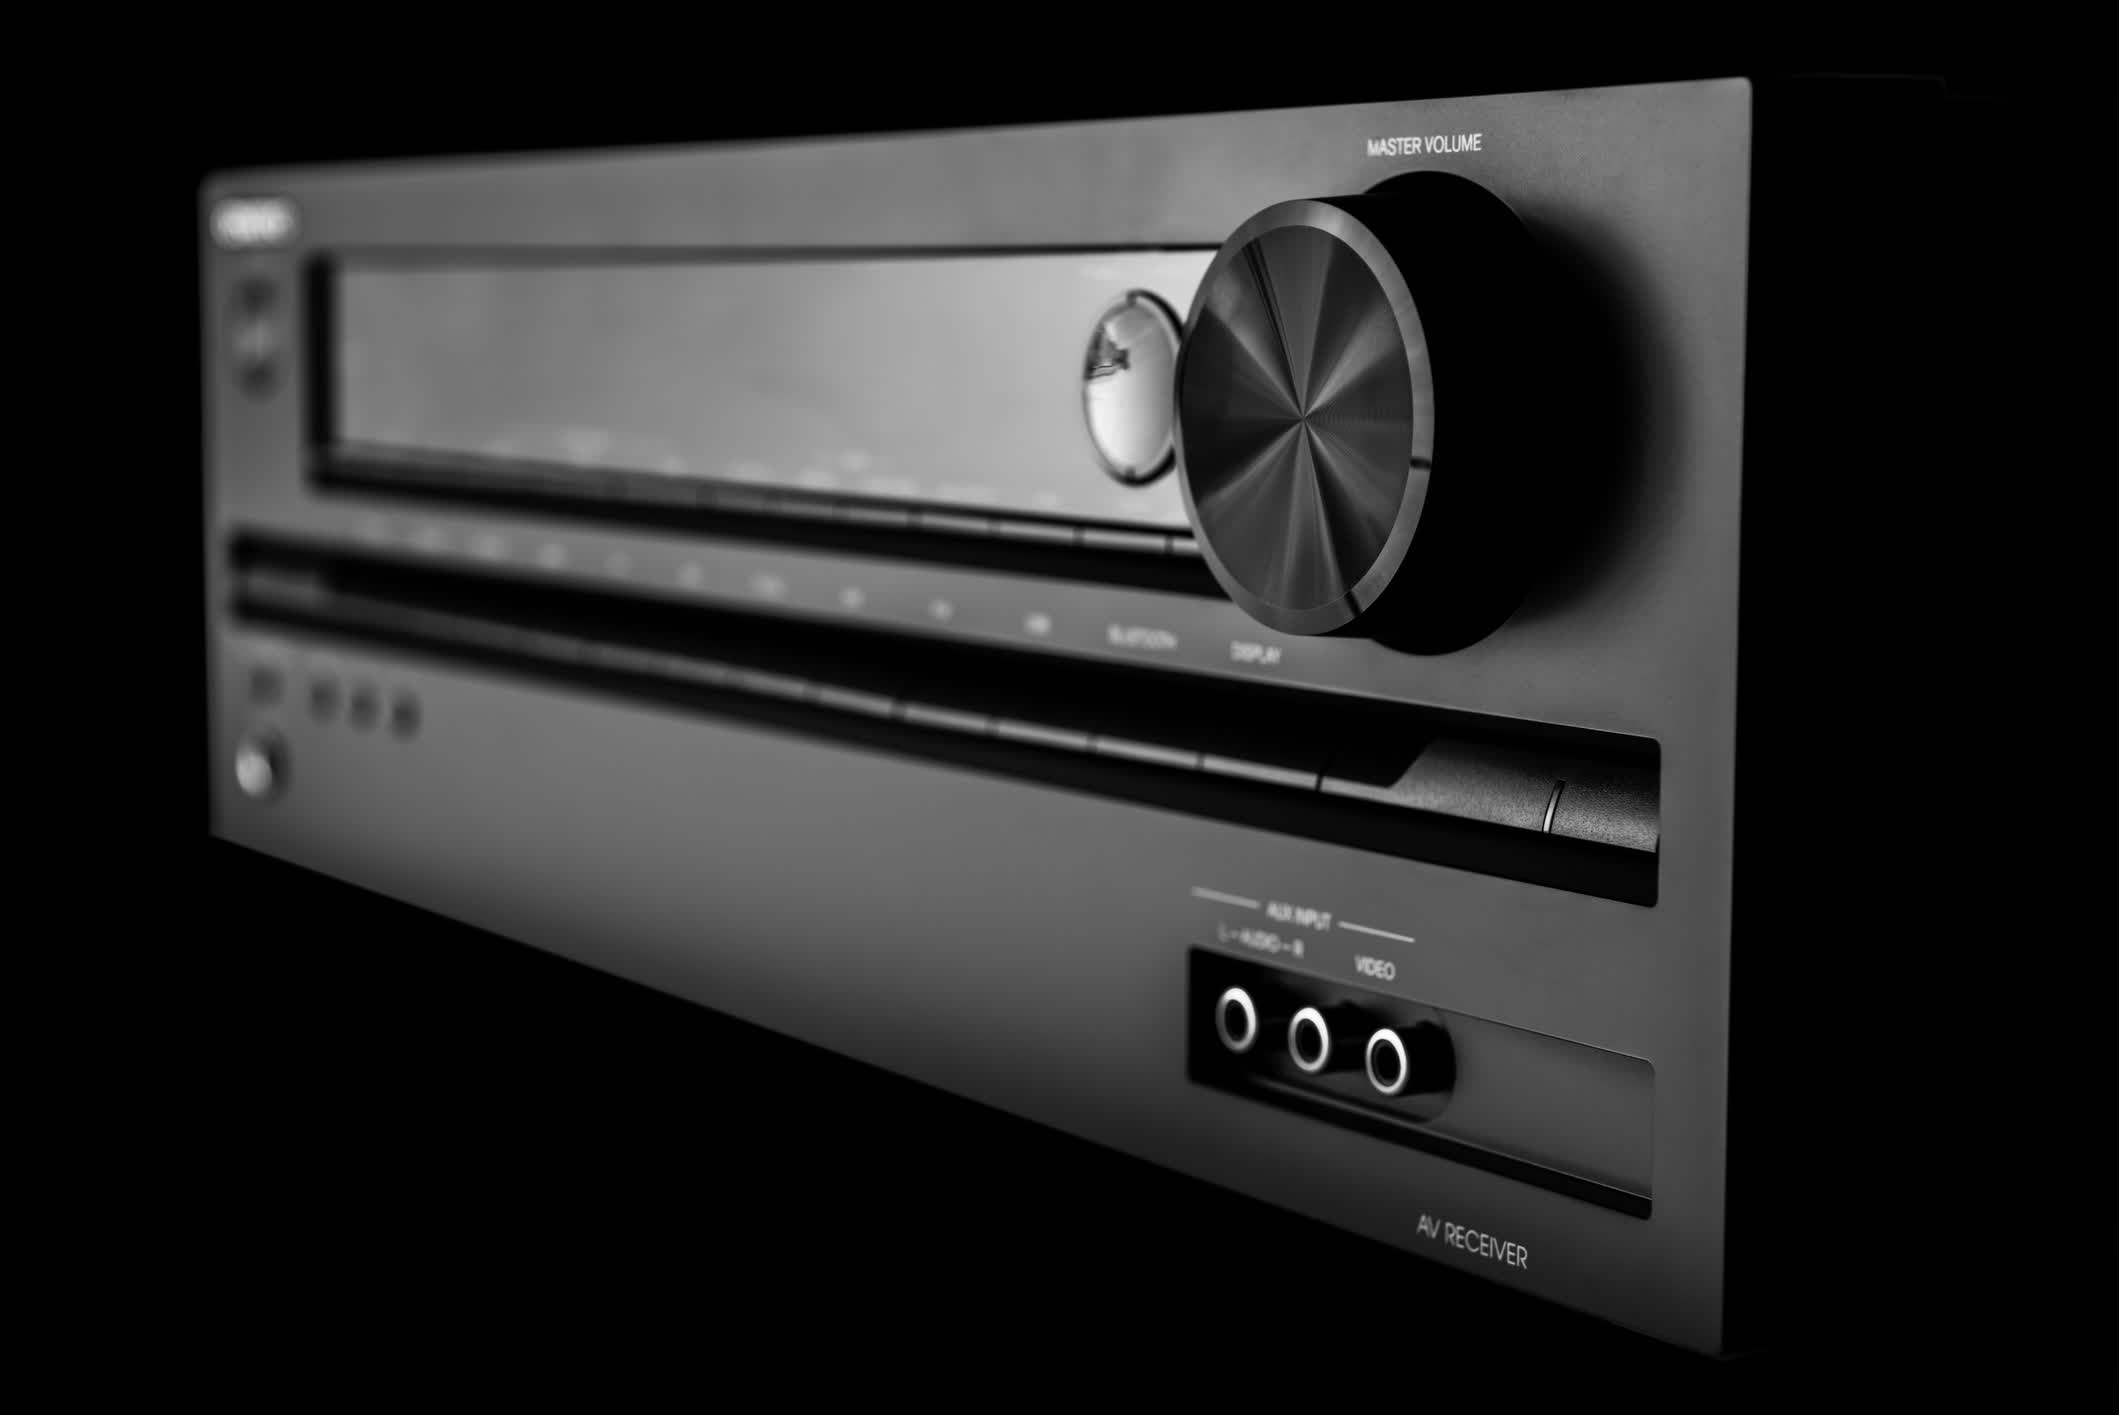 Japanese audio brand Onkyo files for bankruptcy